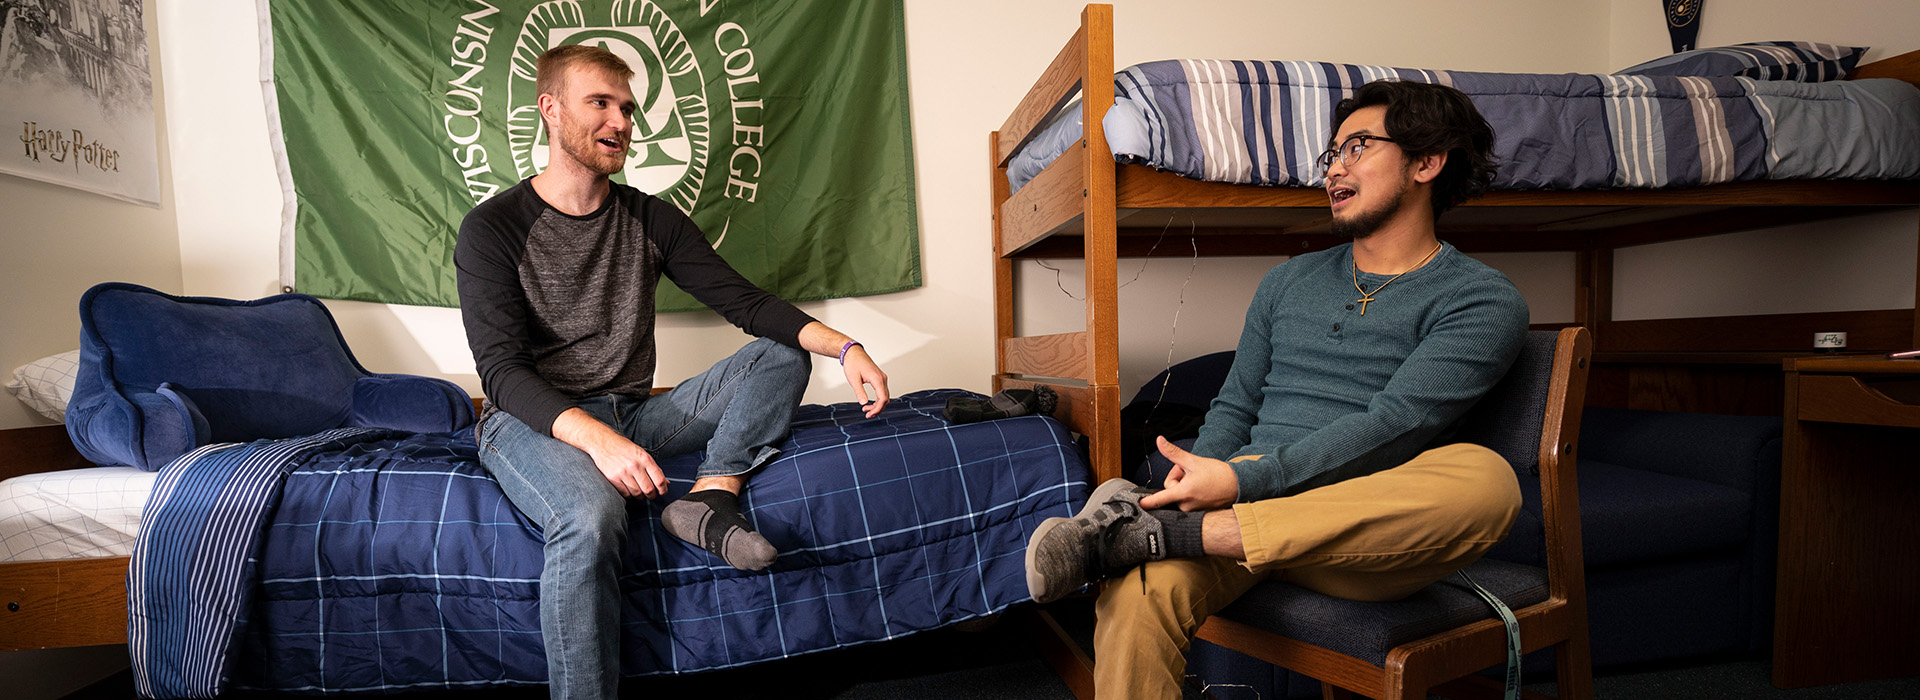 Two male students hanging out in a residence hall room